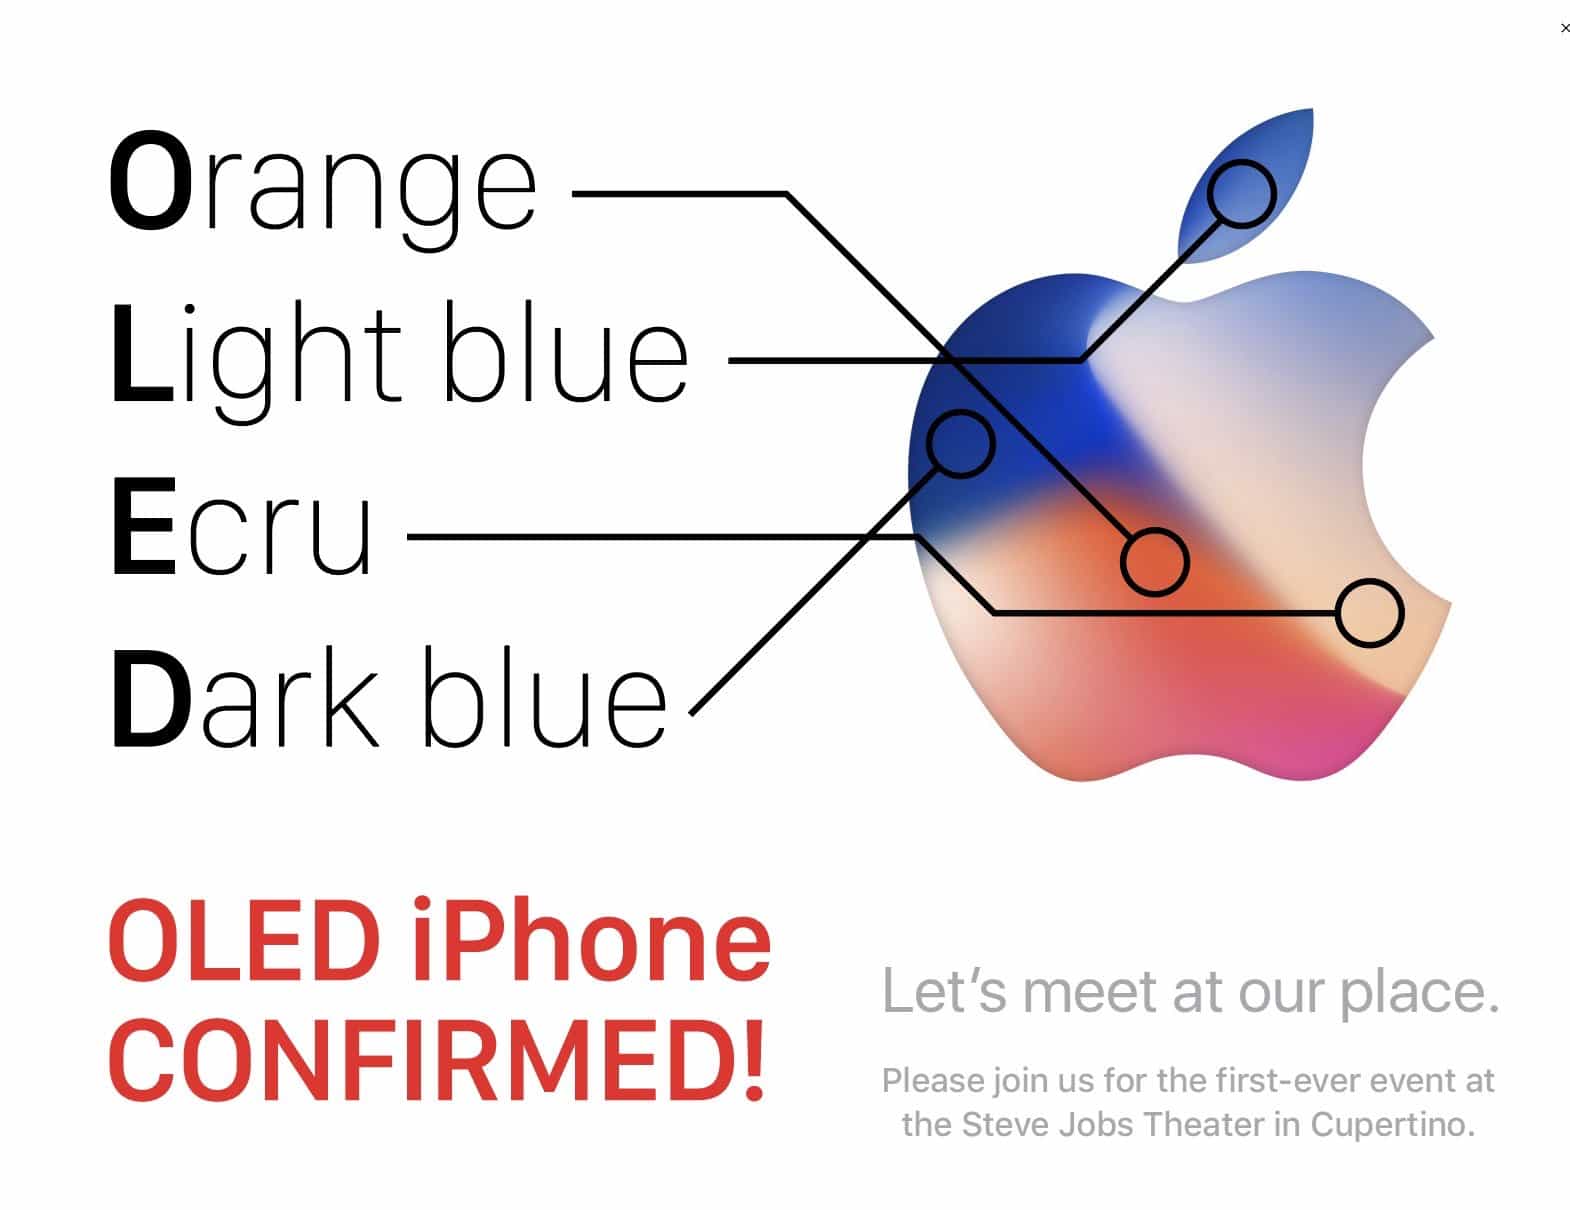 5 Outrageous Theories about Apple’s iPhone 8 Invitation